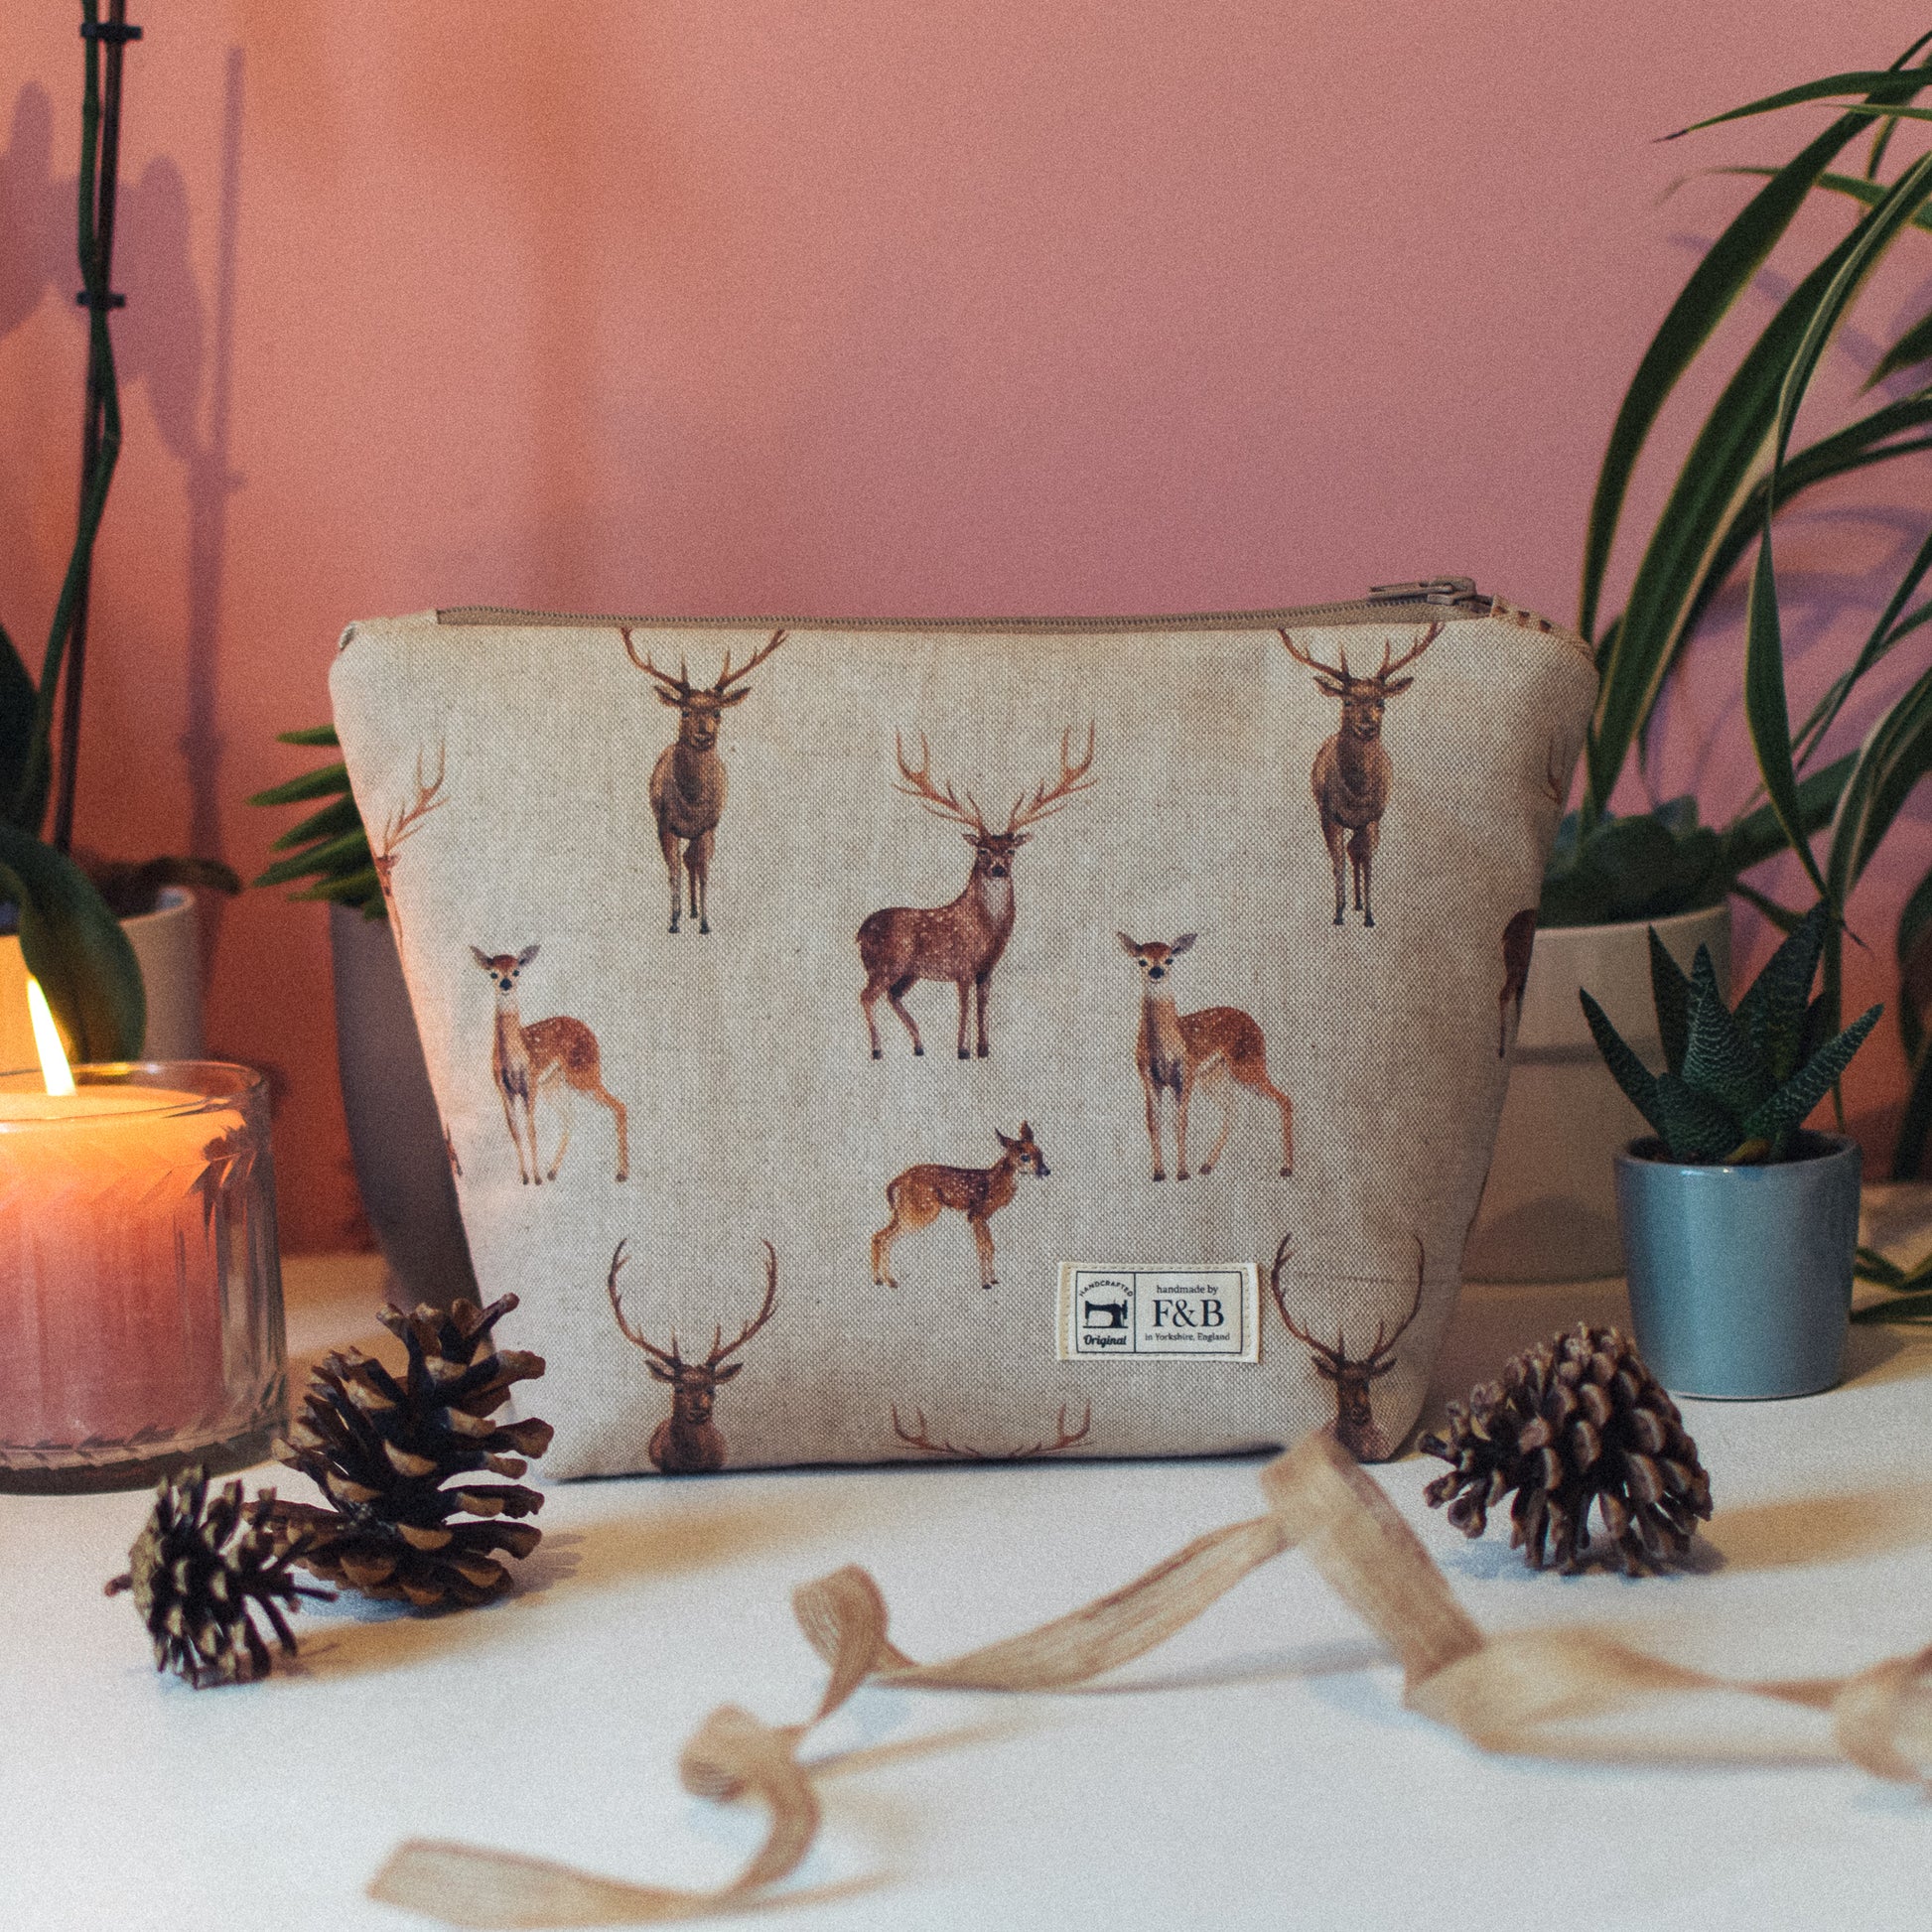 F&B Crafts Deer Print Washbag featuring watercolour style deer illustrations on a linen background fabric